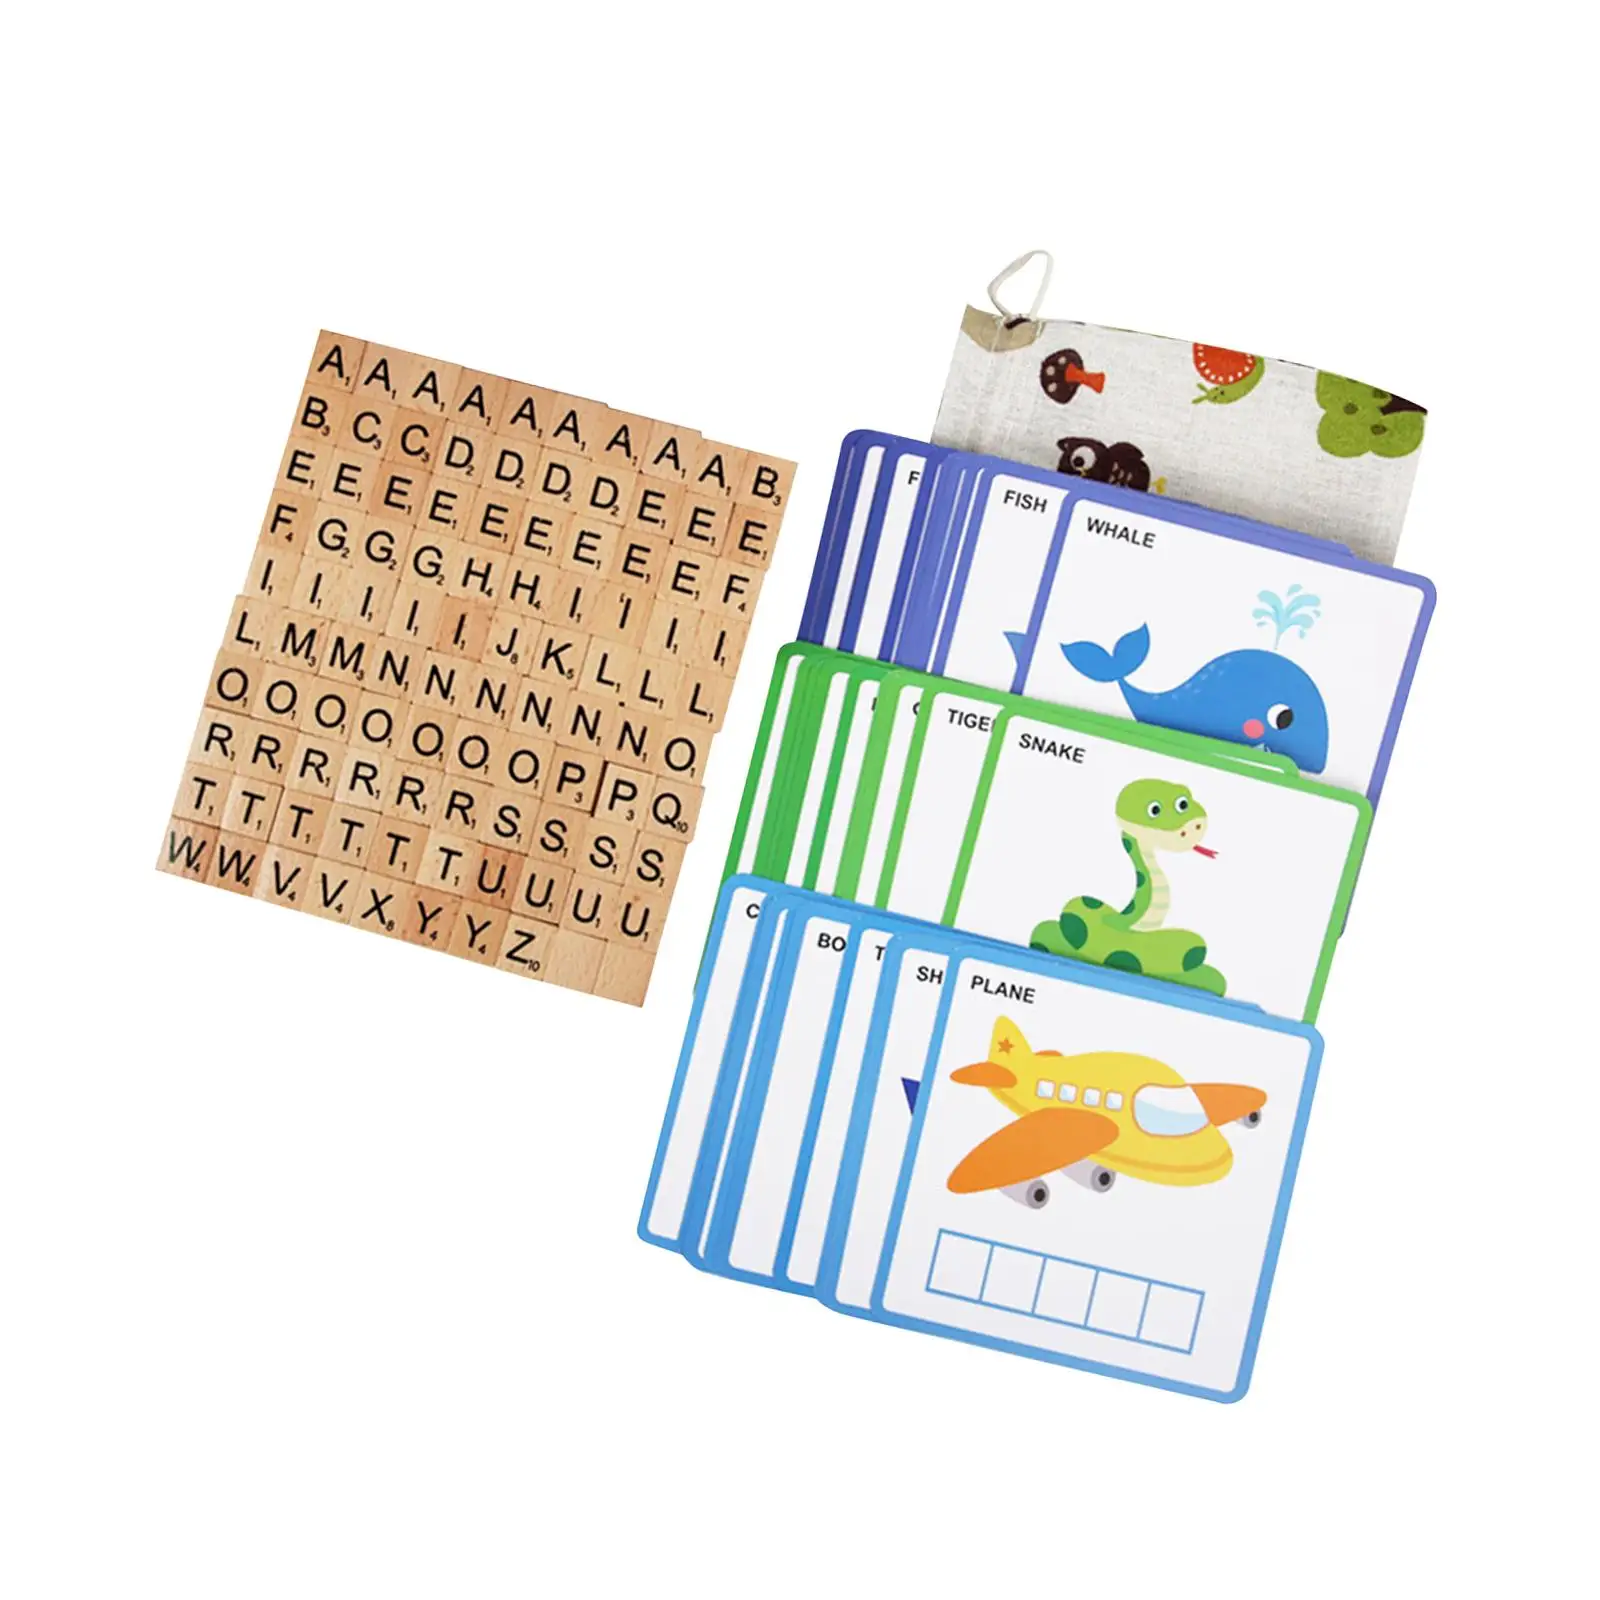 

Spelling Word Game with 100 Alphabet Blocks Early Educational Montessori Toy Spelling Matching Letter Games for Children Kids